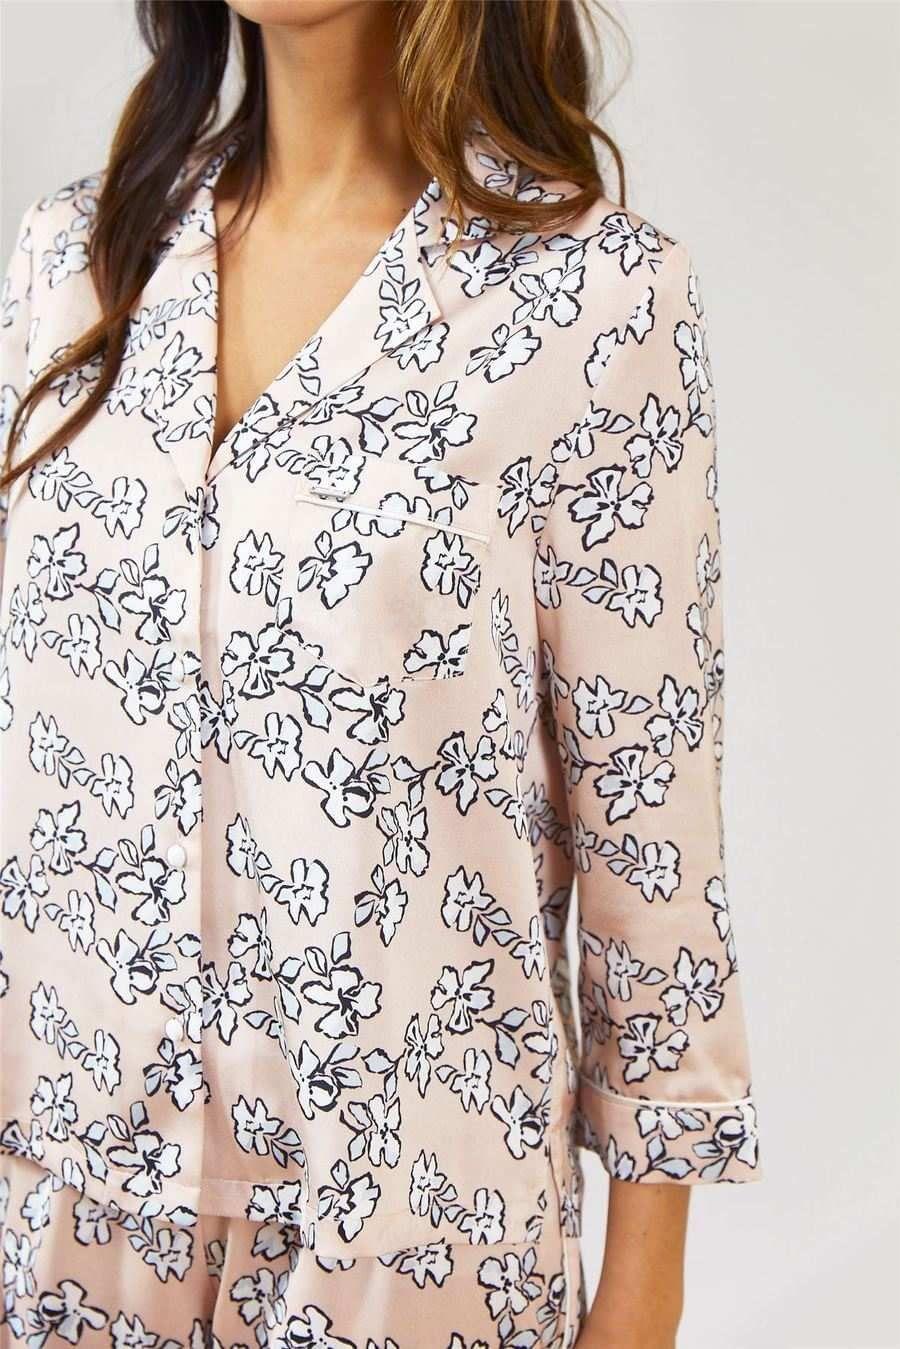 Mix and Match Floral Shirt in Blush Pink (Shirt only)